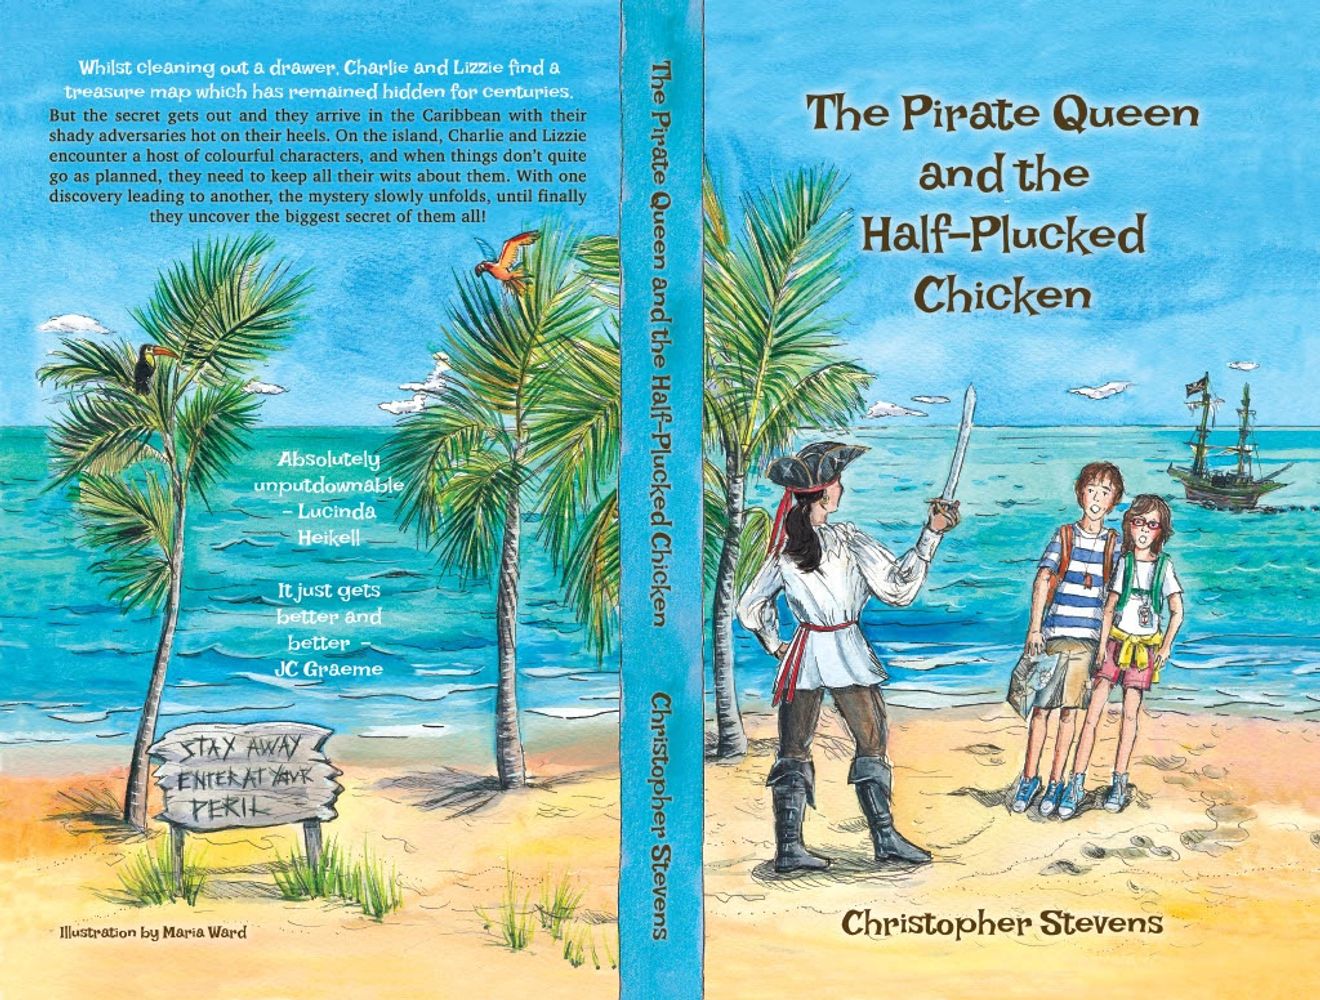 The Pirate Queen and the Half-Plucked Chicken